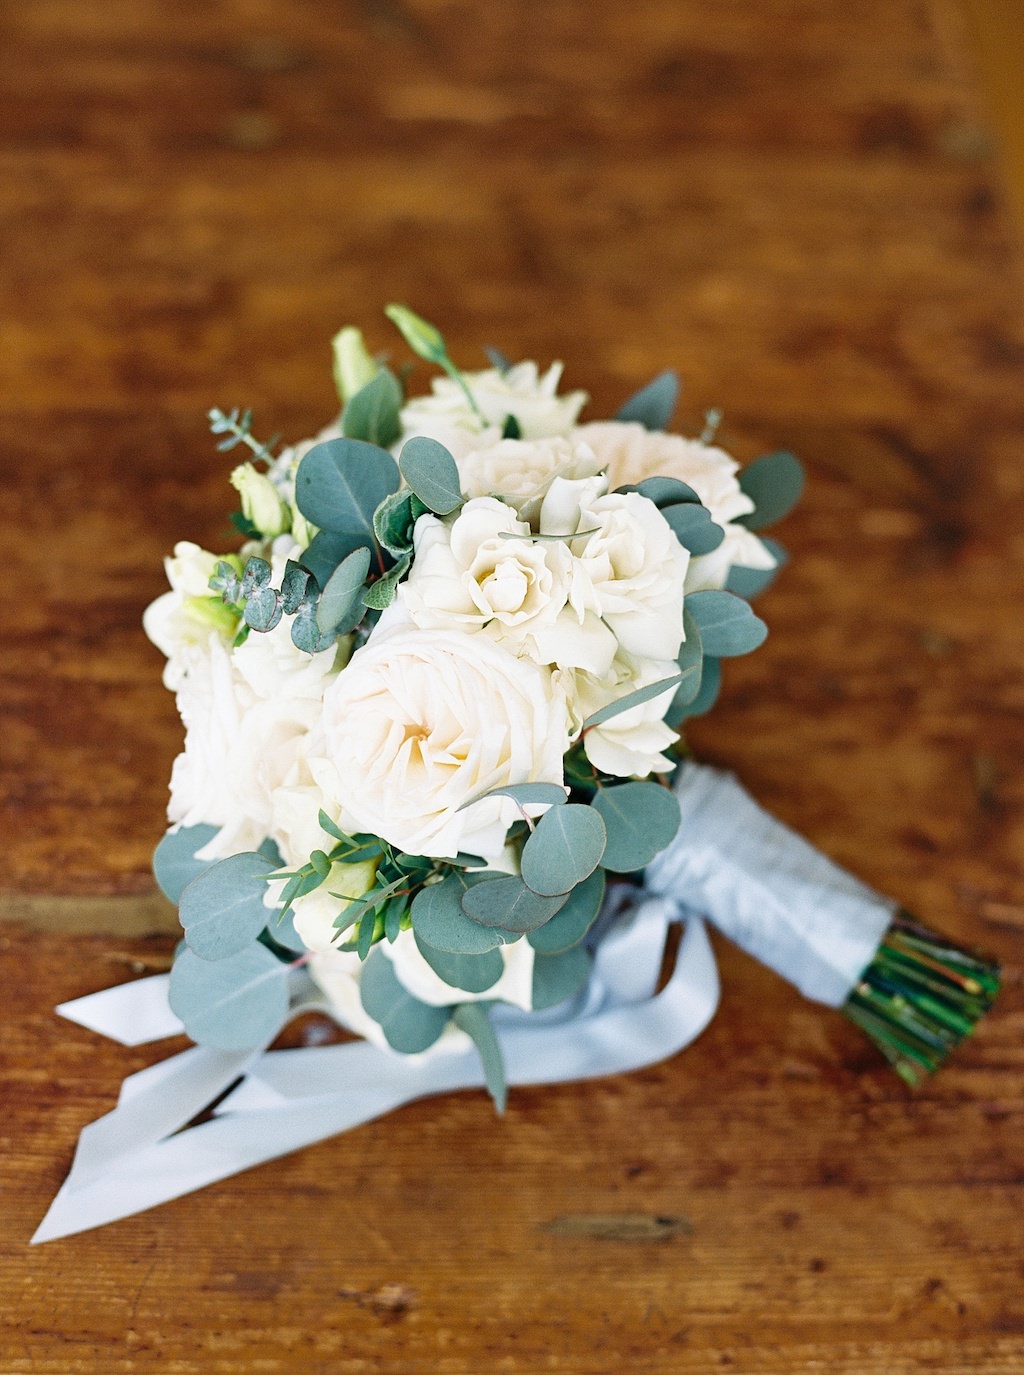 Ivory, White Garden Roses and Silver Dollar Eucalyptus Floral Wedding Bouquet with Silk Dusty Blue Ribbon | Tampa Bay Wedding Florist Cotton & Magnolia